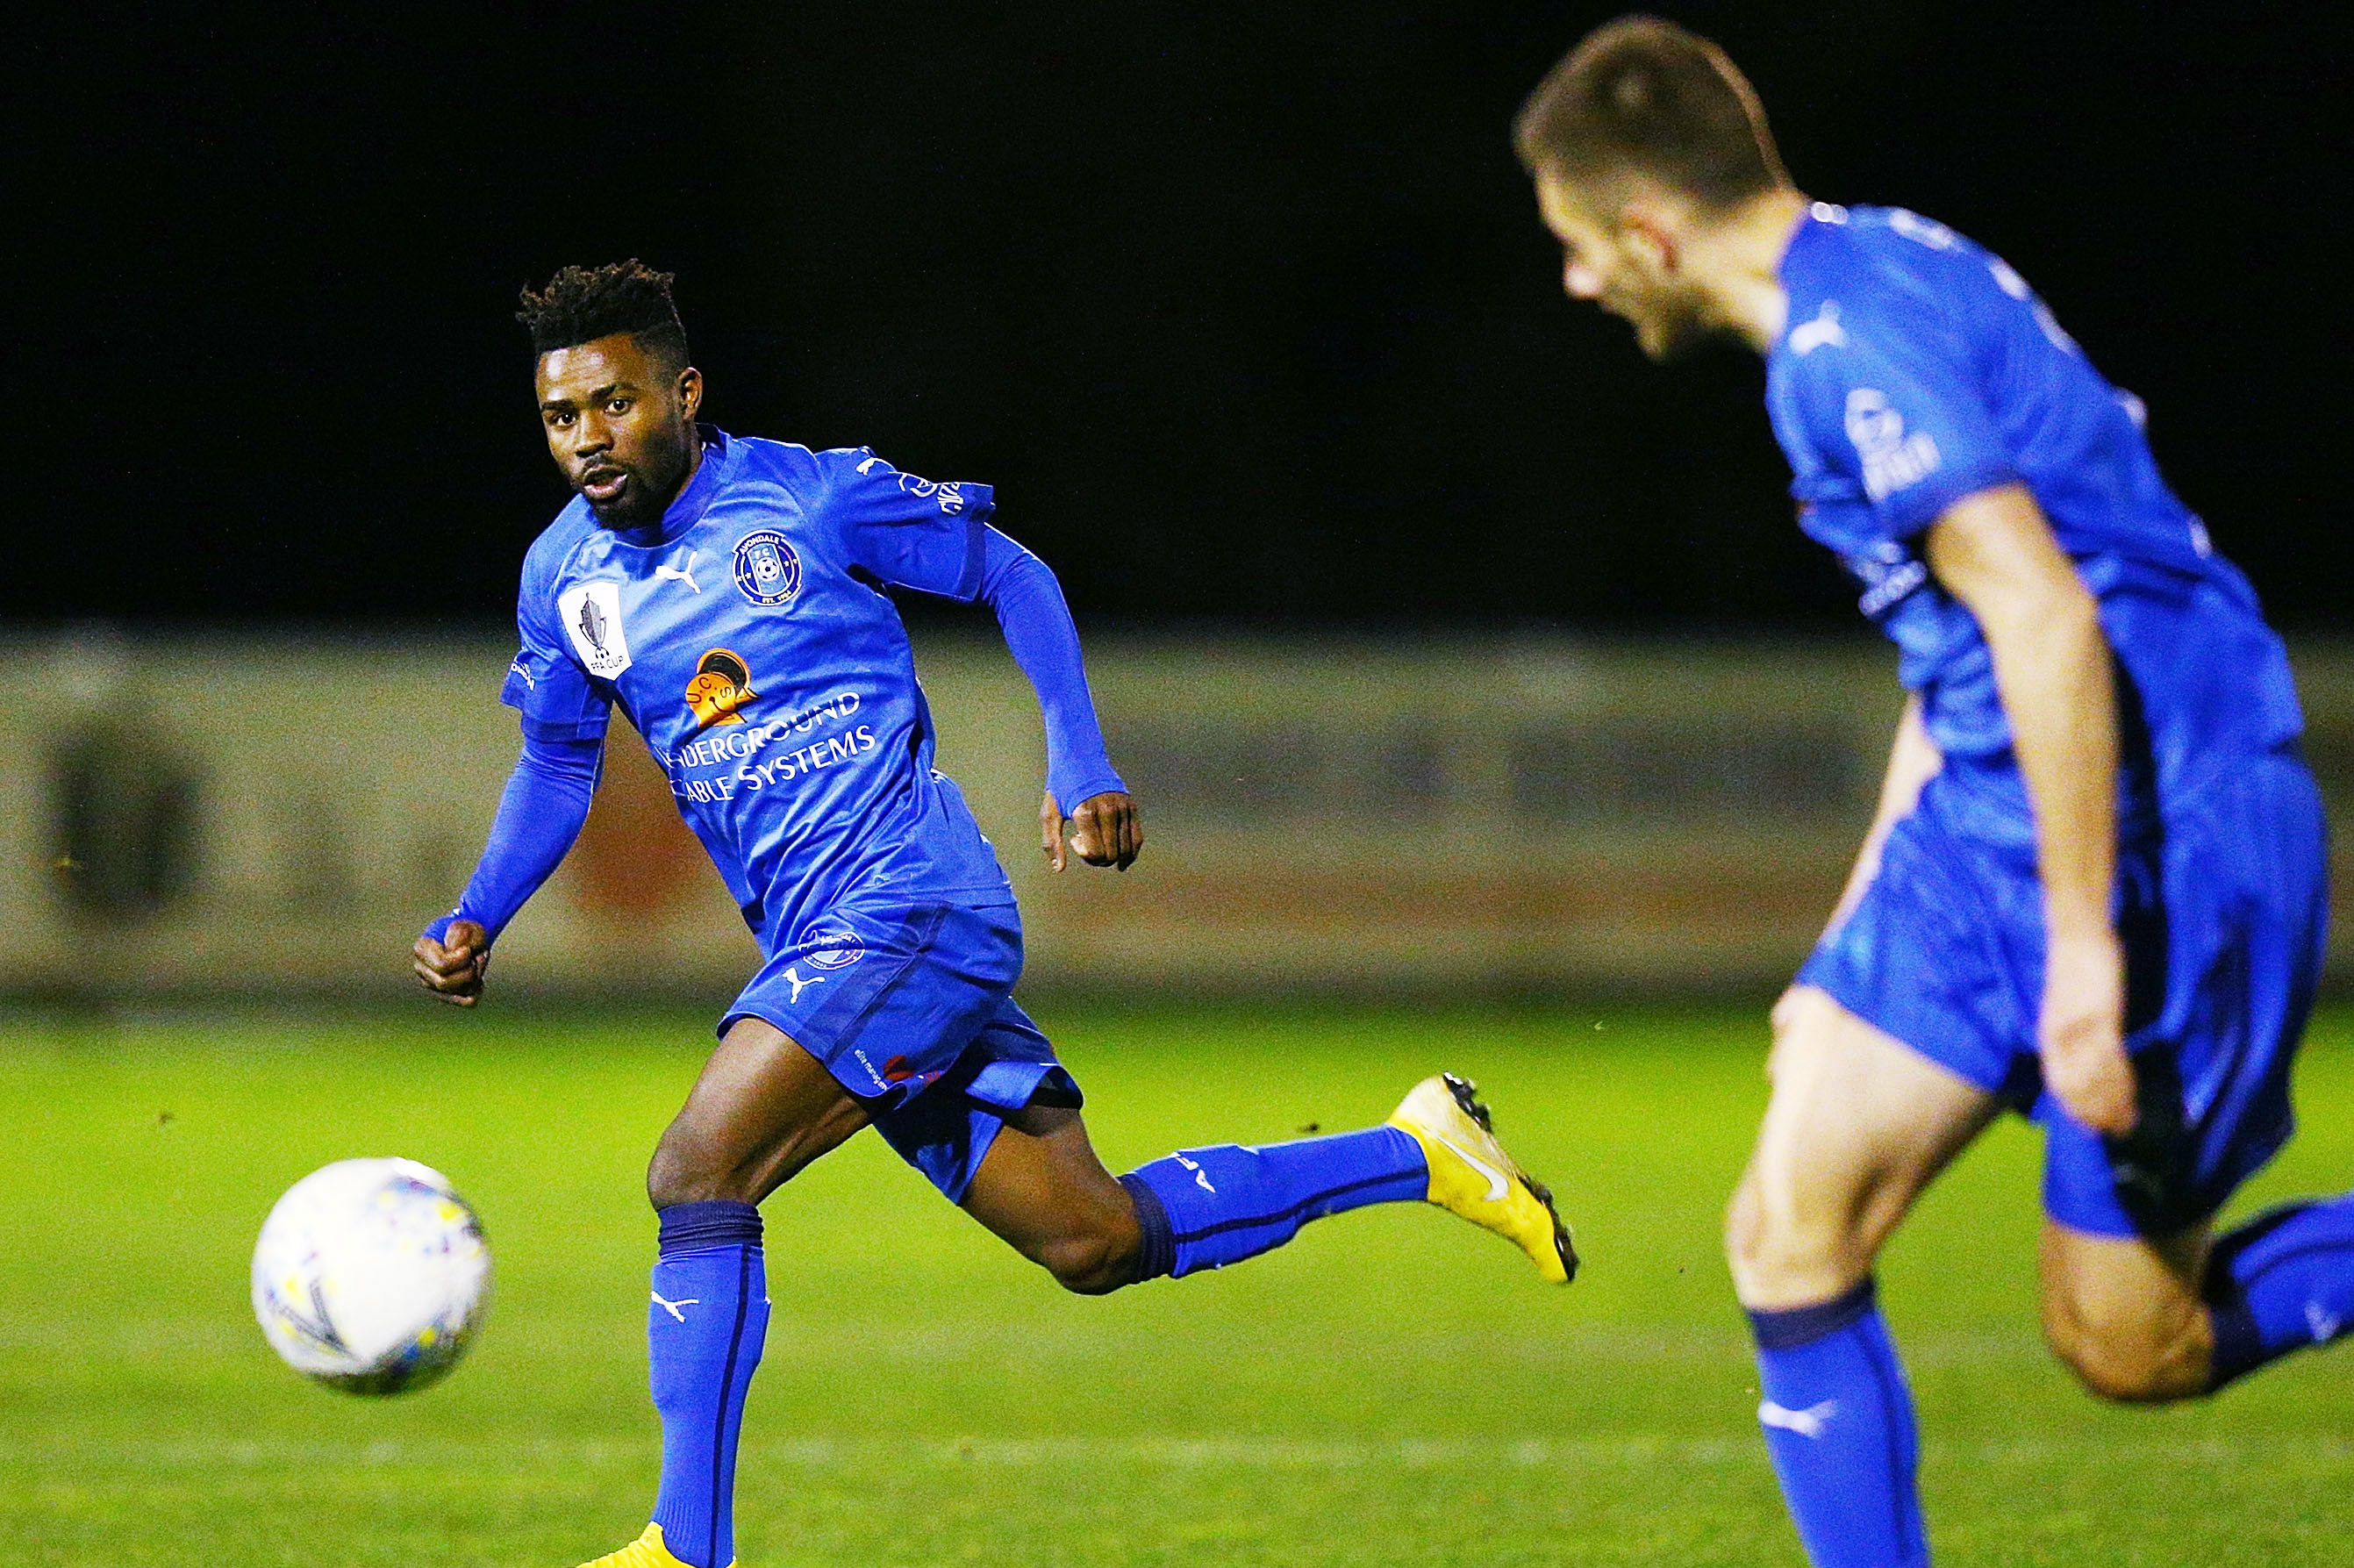 Elvis Kamsoba in action in the FFA Cup.